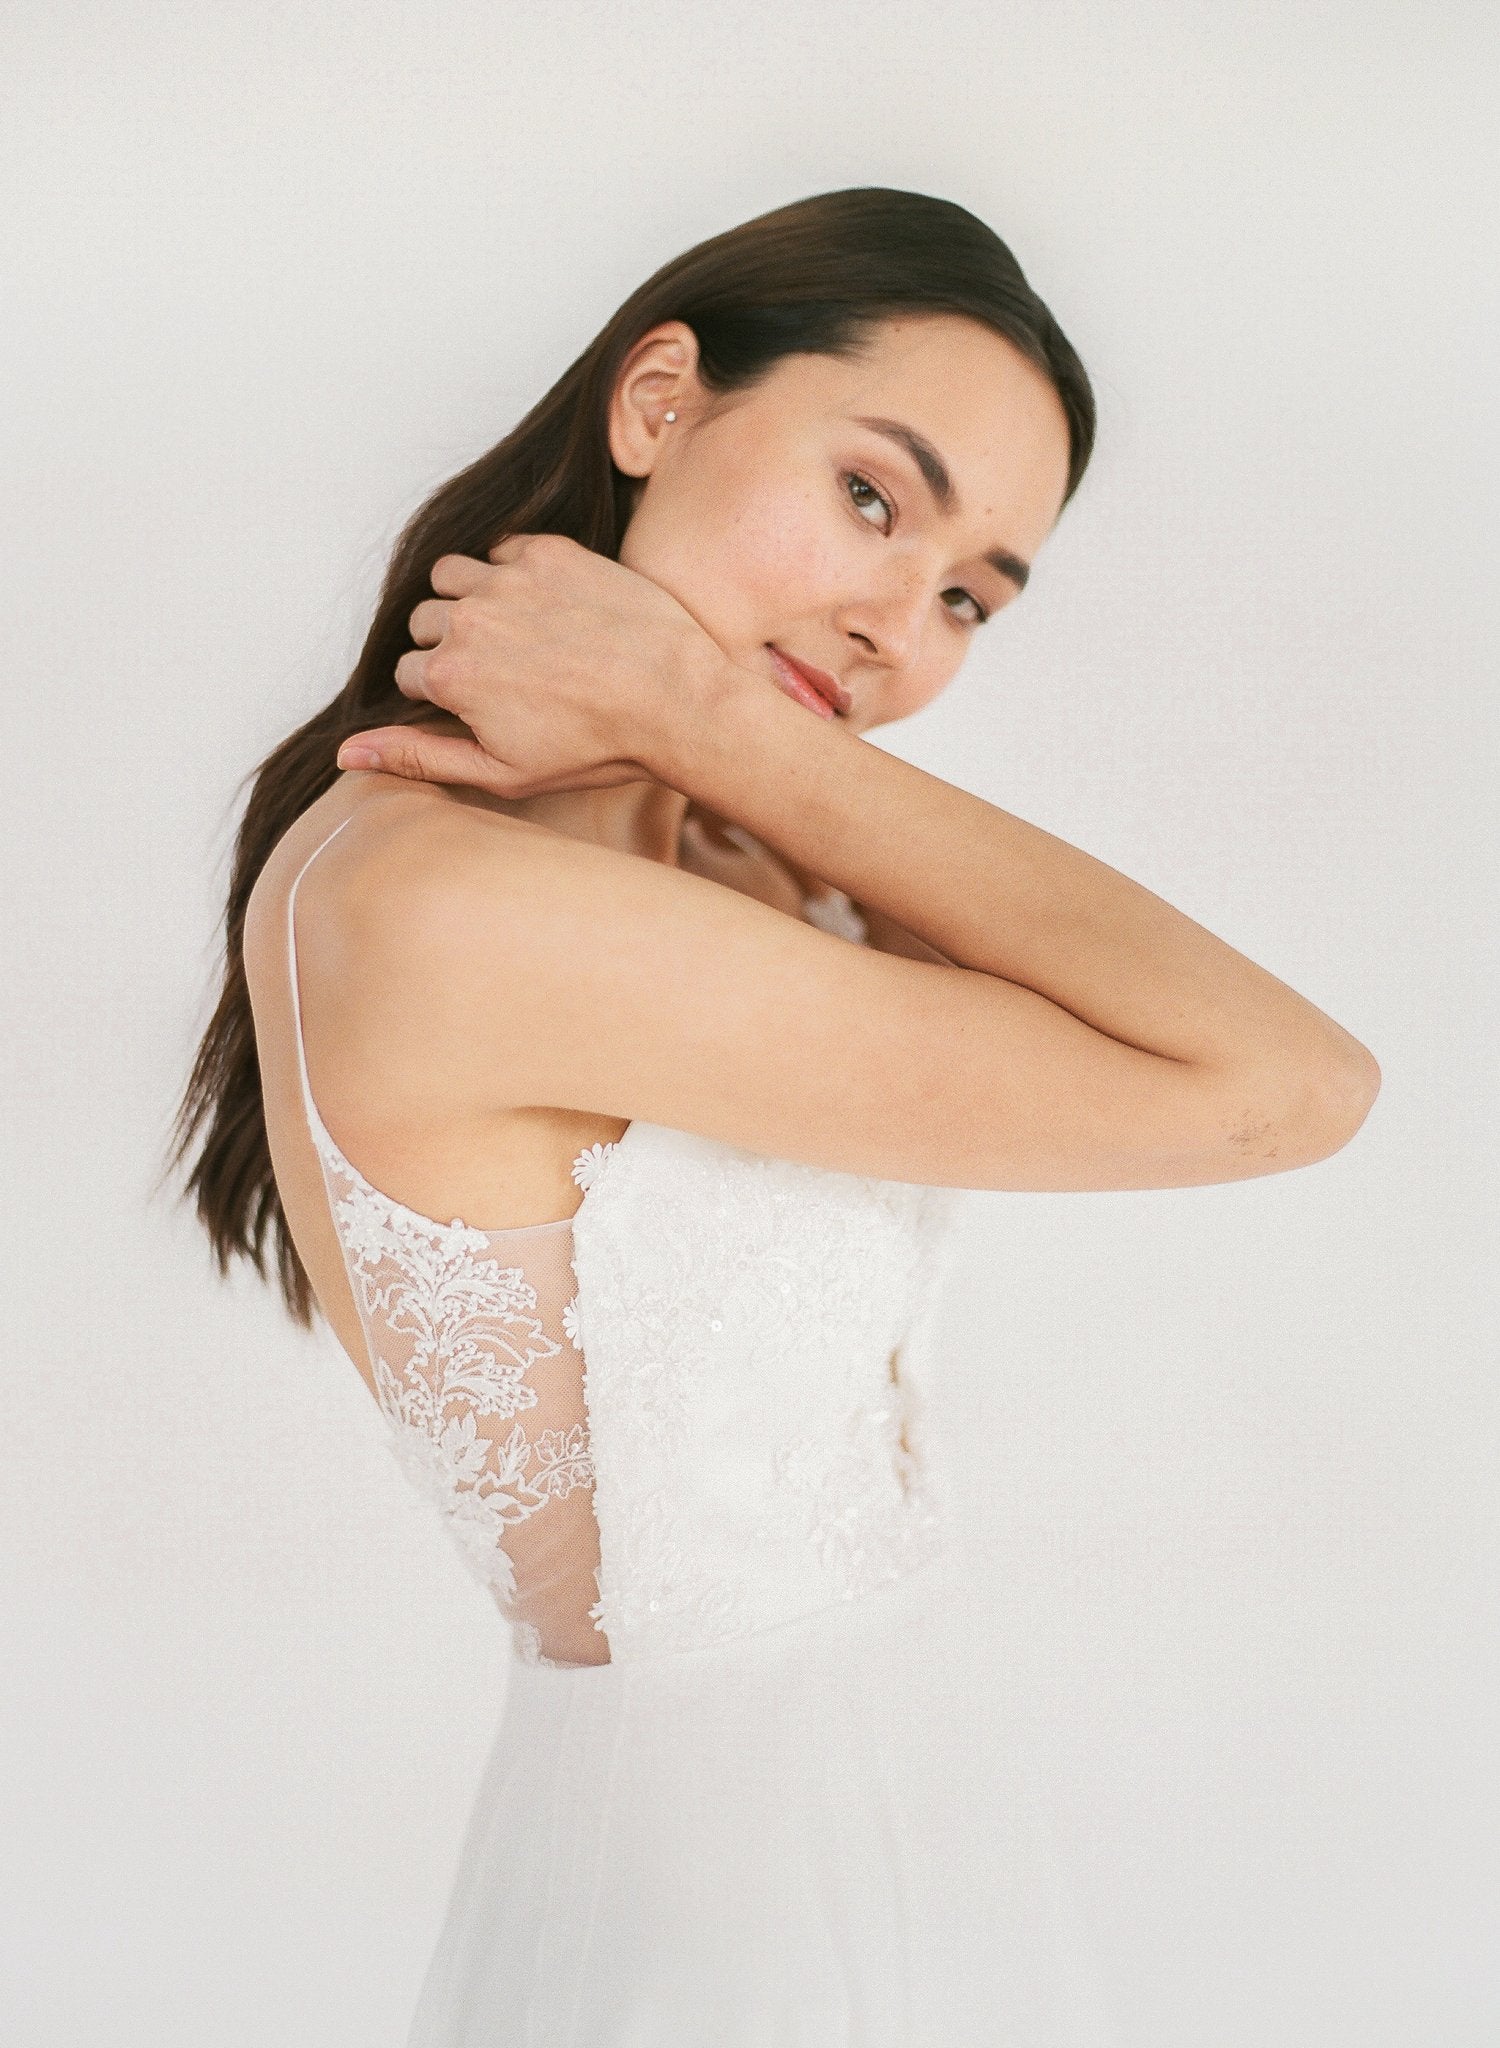 Ethically made flowy beach wedding dress with lace appliqué, a low back, and plunging neckline